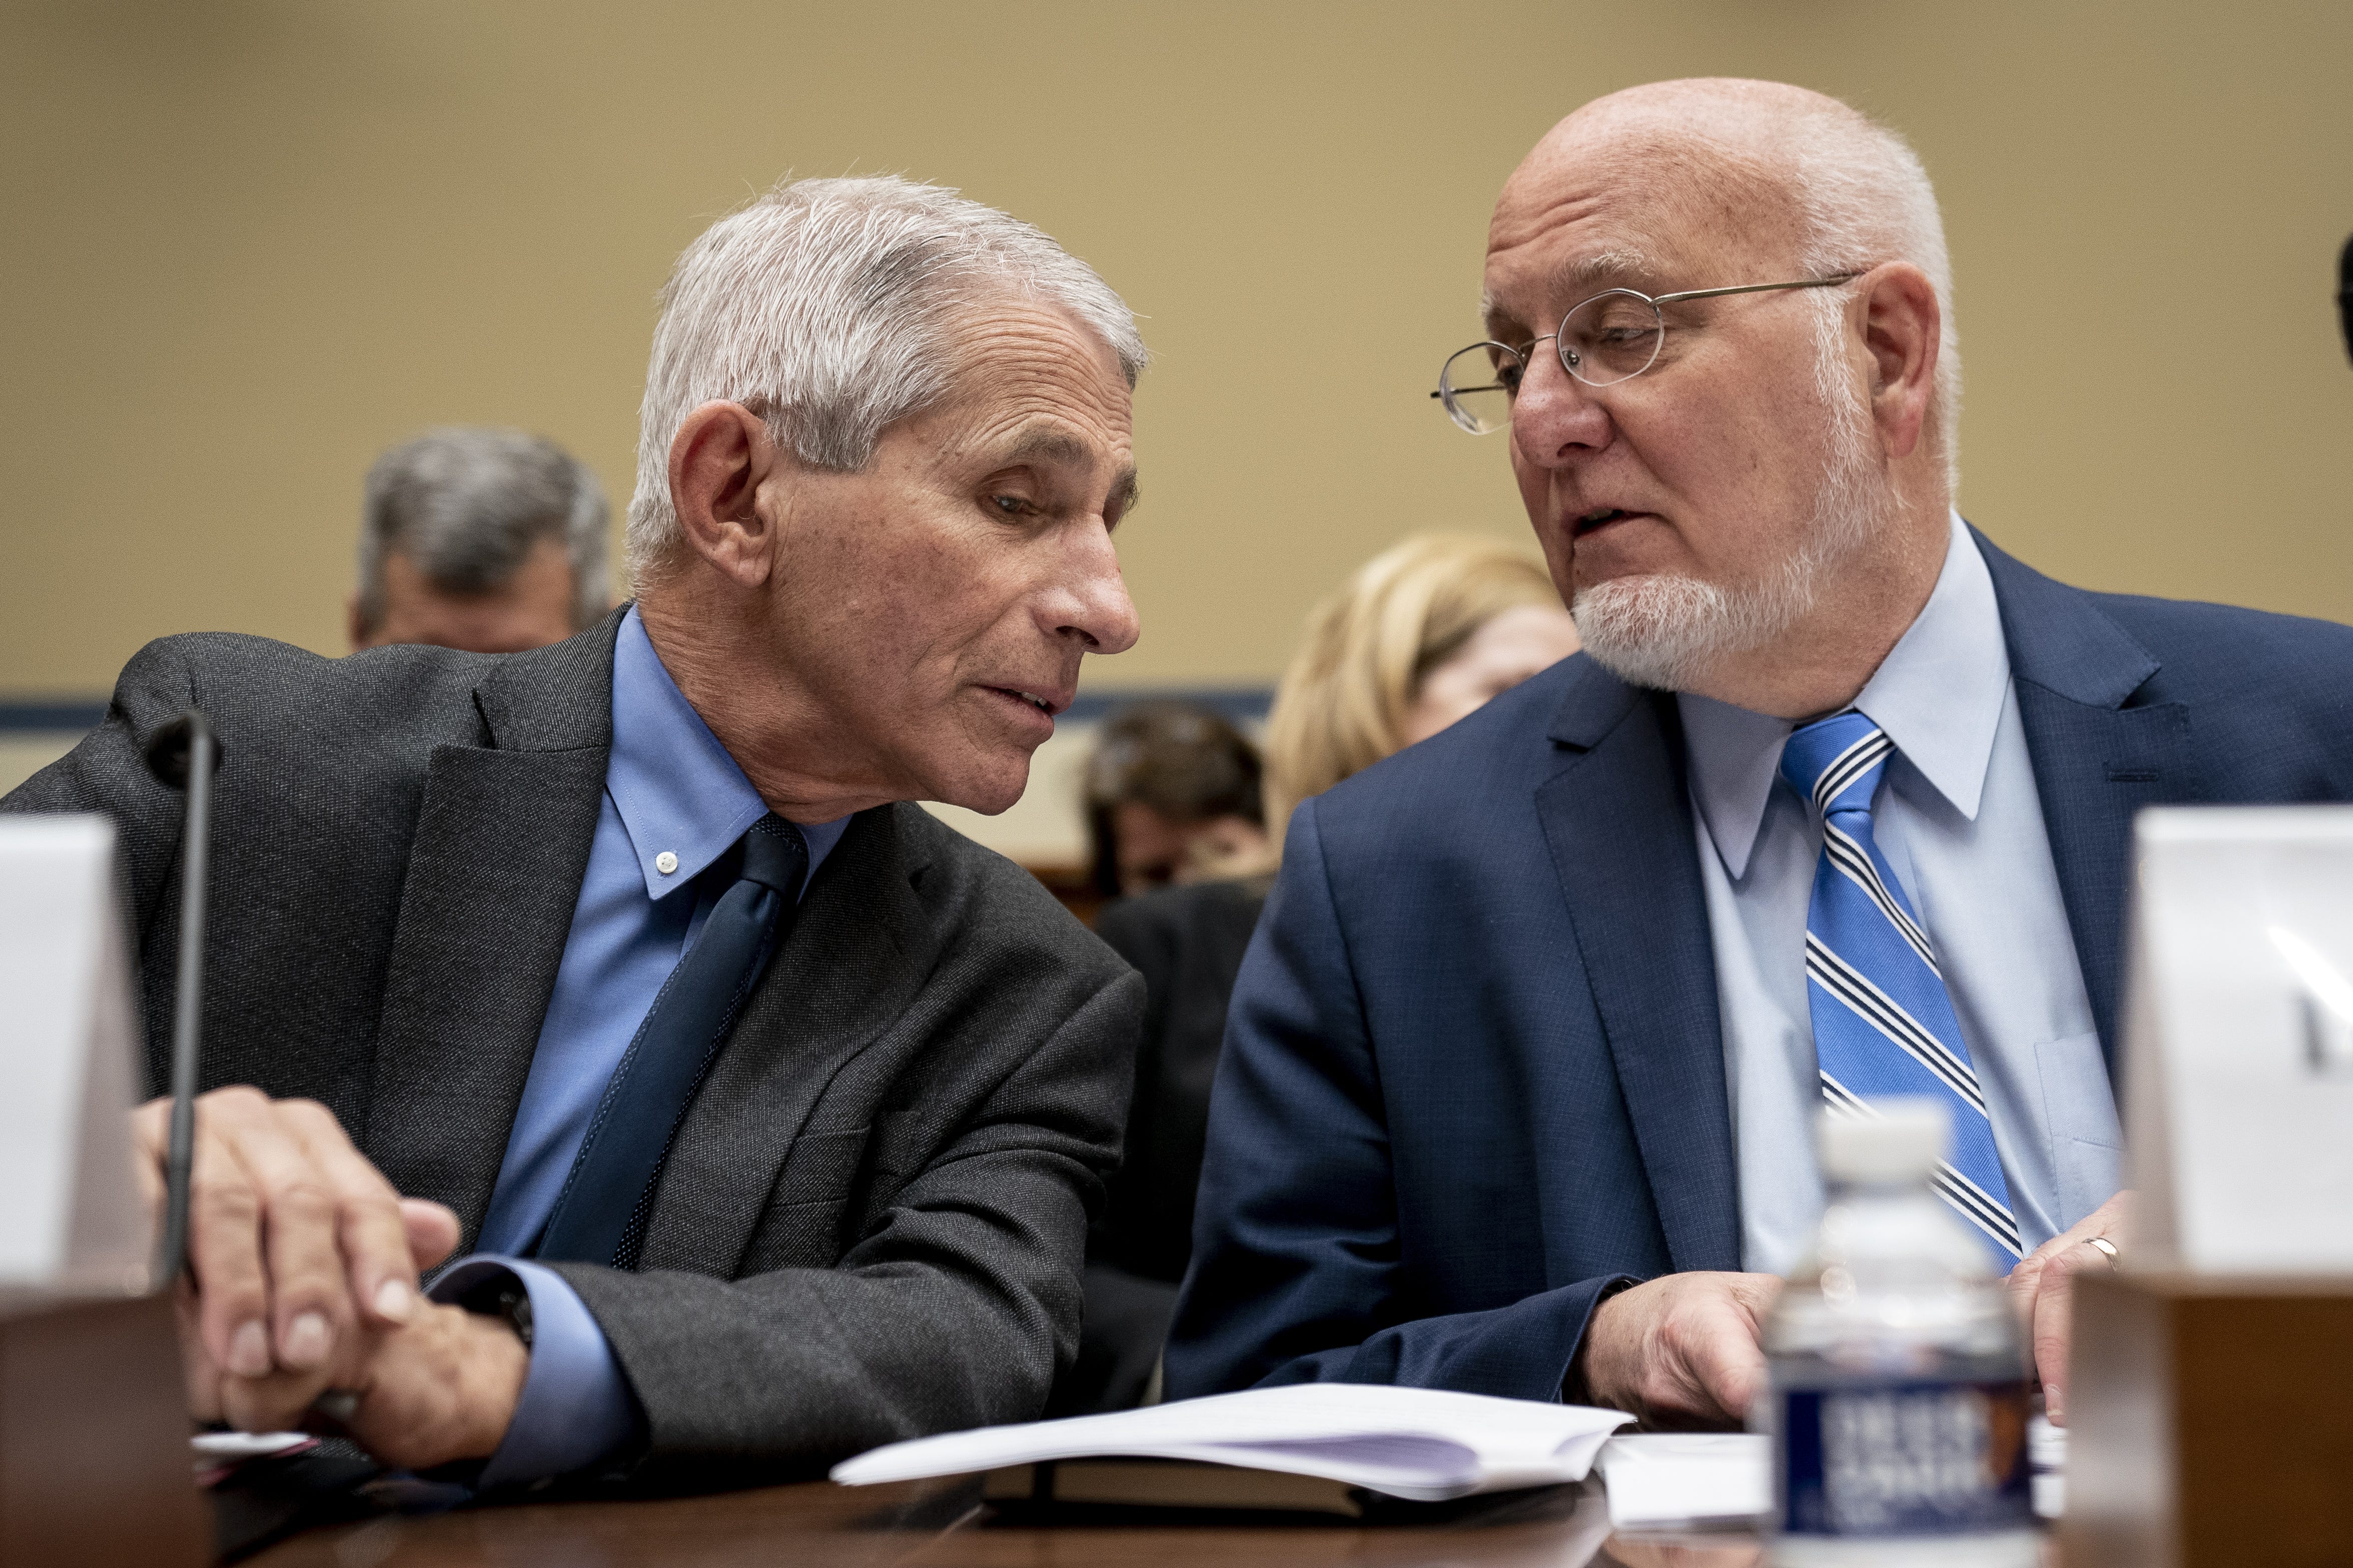 Drs. Anthony Fauci, the nation's top infectious disease expert, left, and Dr. Robert Redfield, the director of the CDC, at a House committee hearing about the coronavirus on March 11.